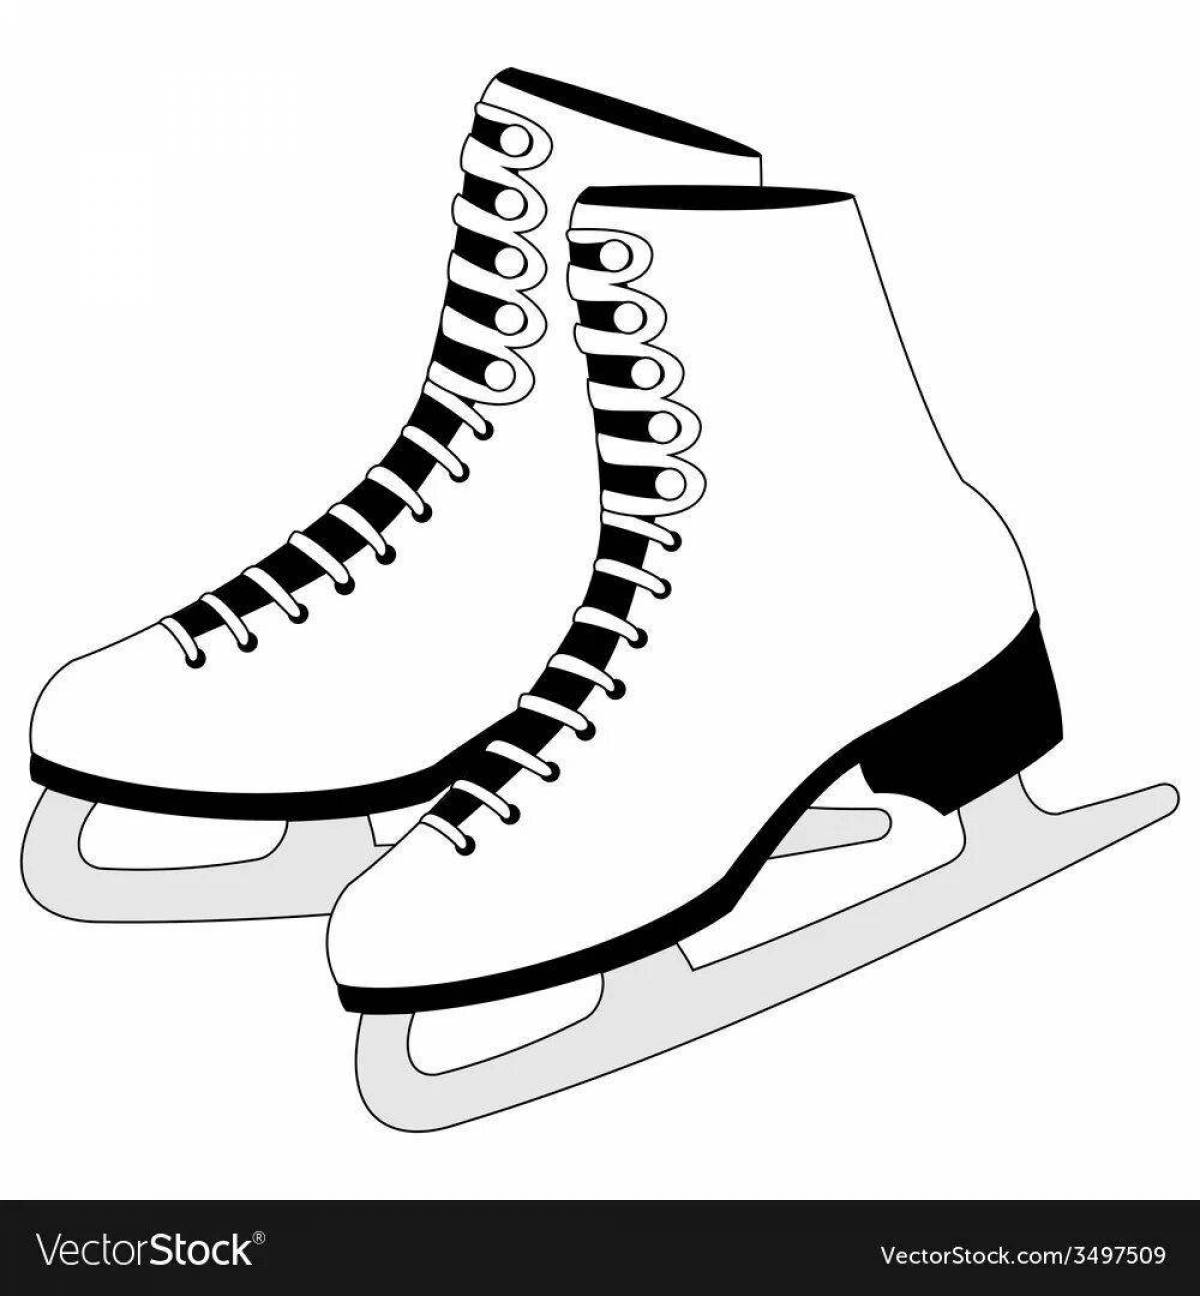 Skate coloring page